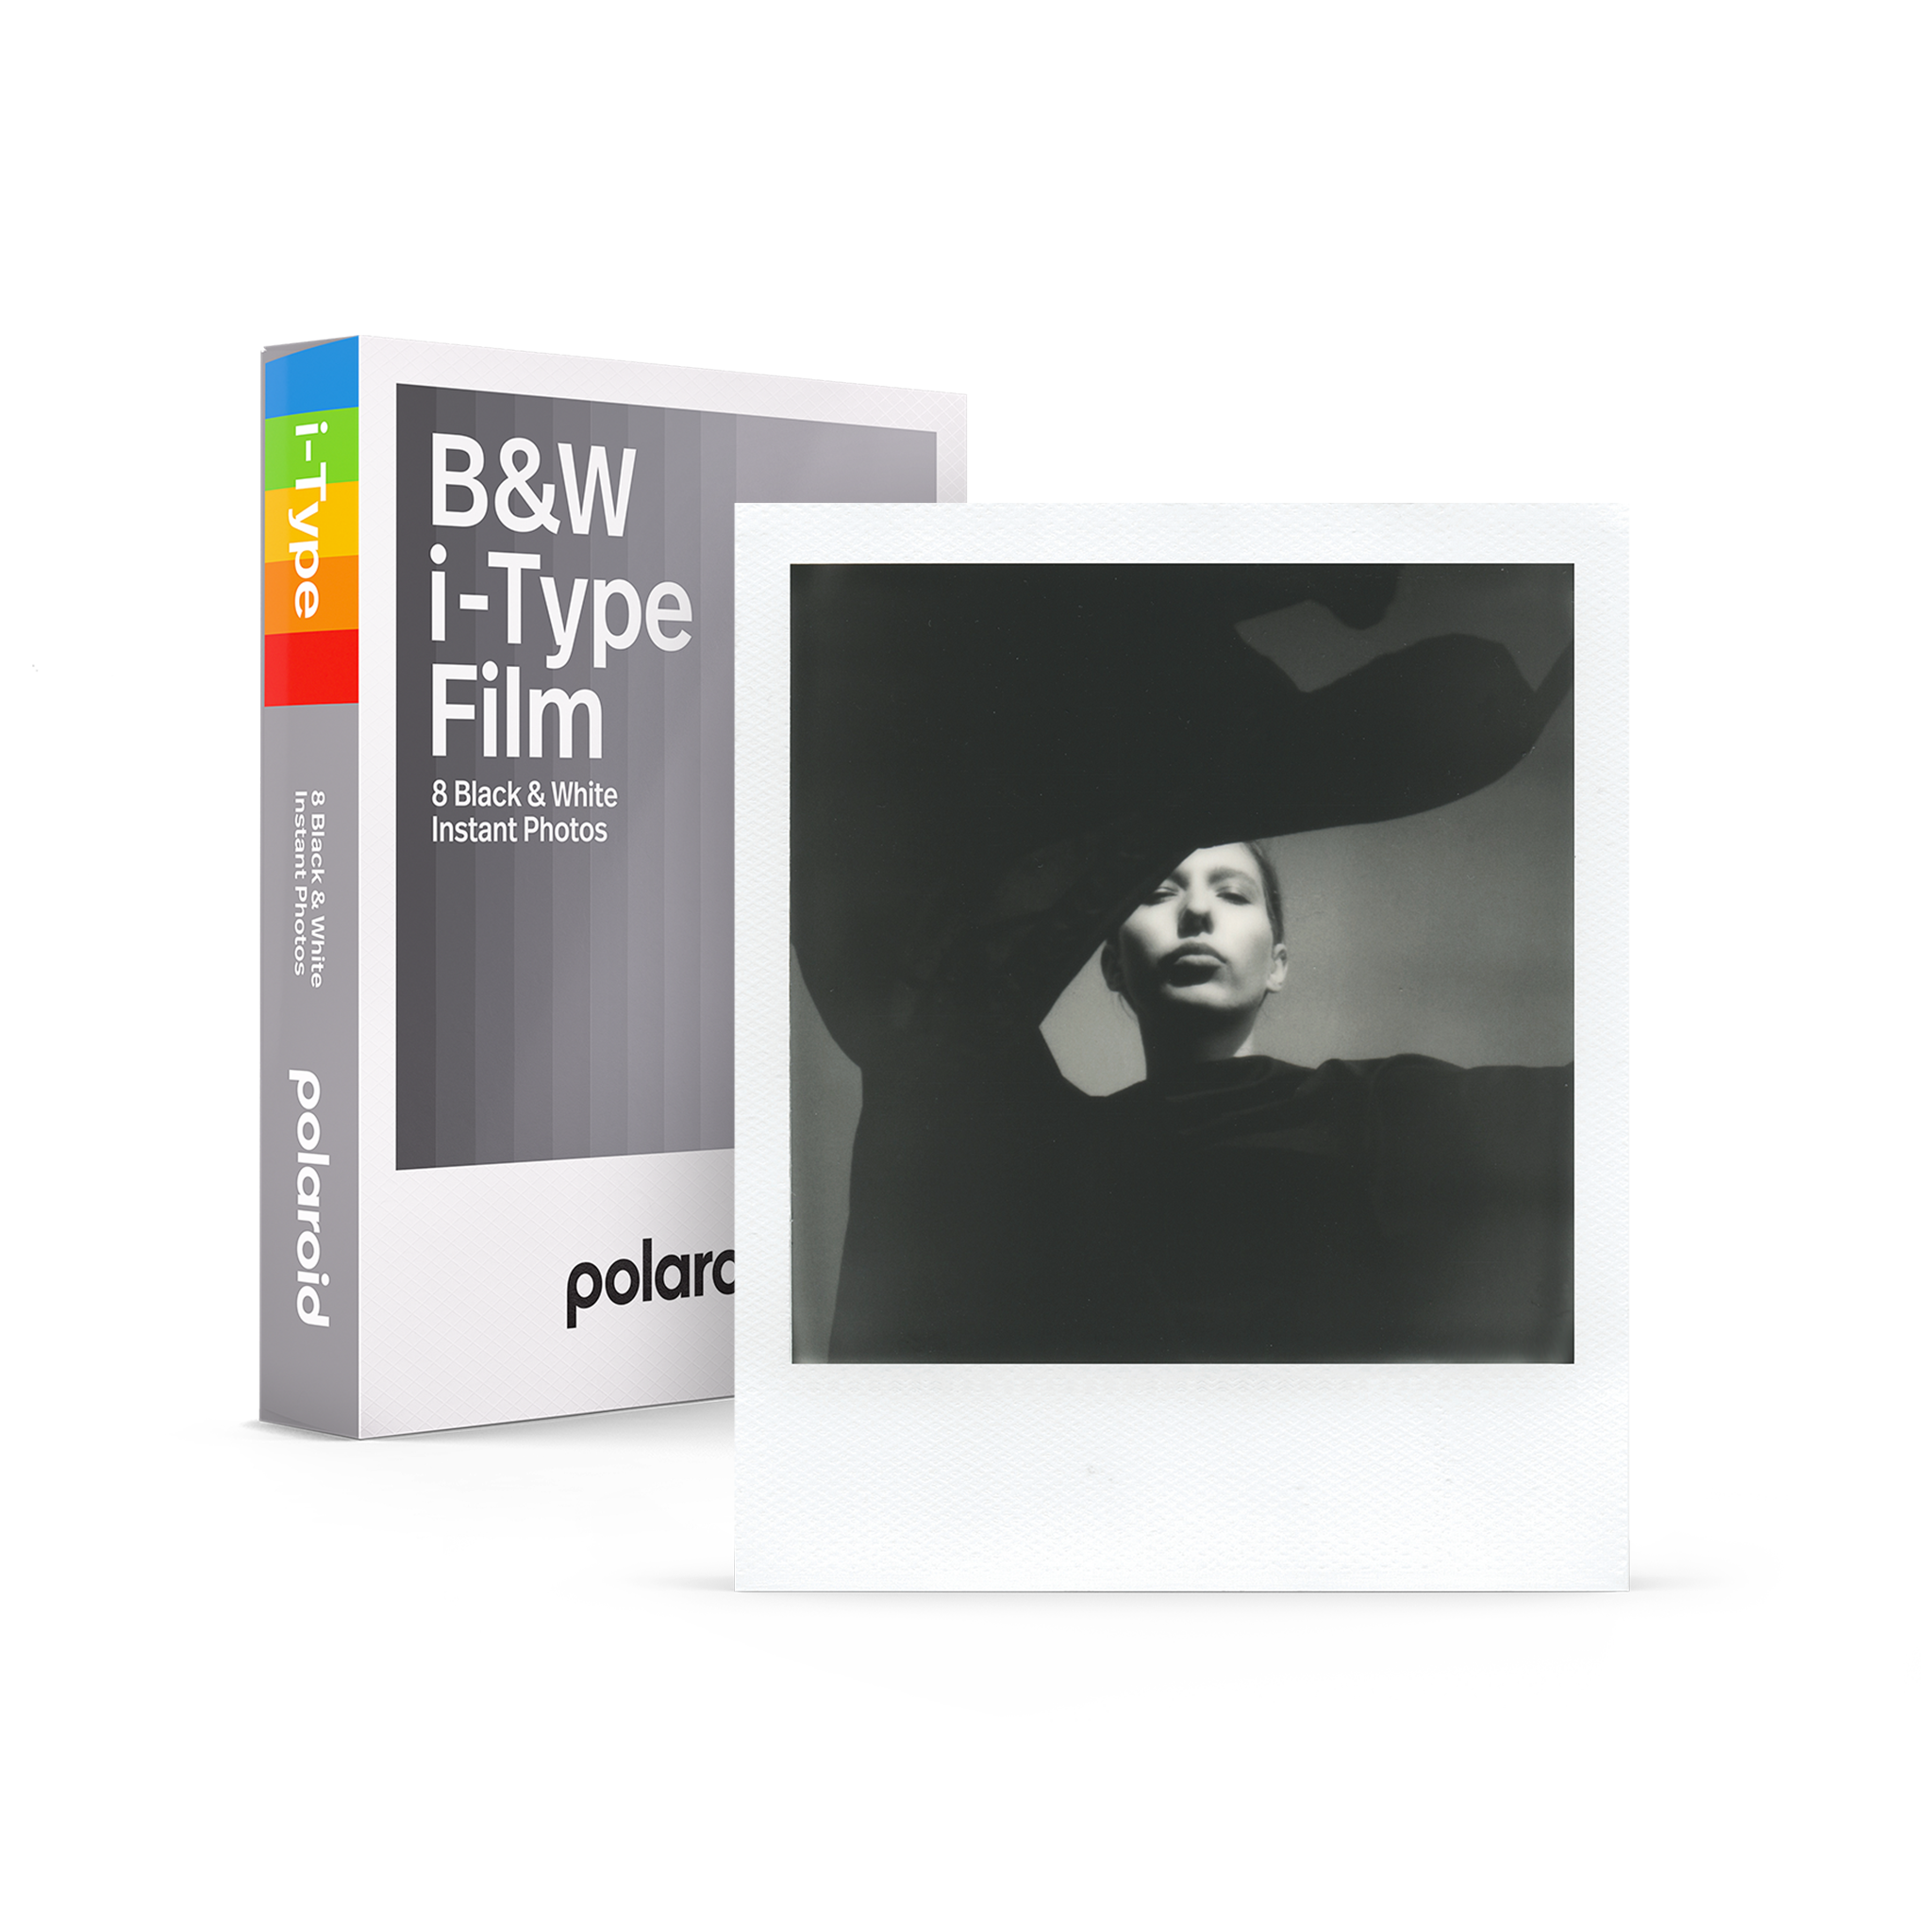 Get Creative With The New Polaroid i-Type Films!